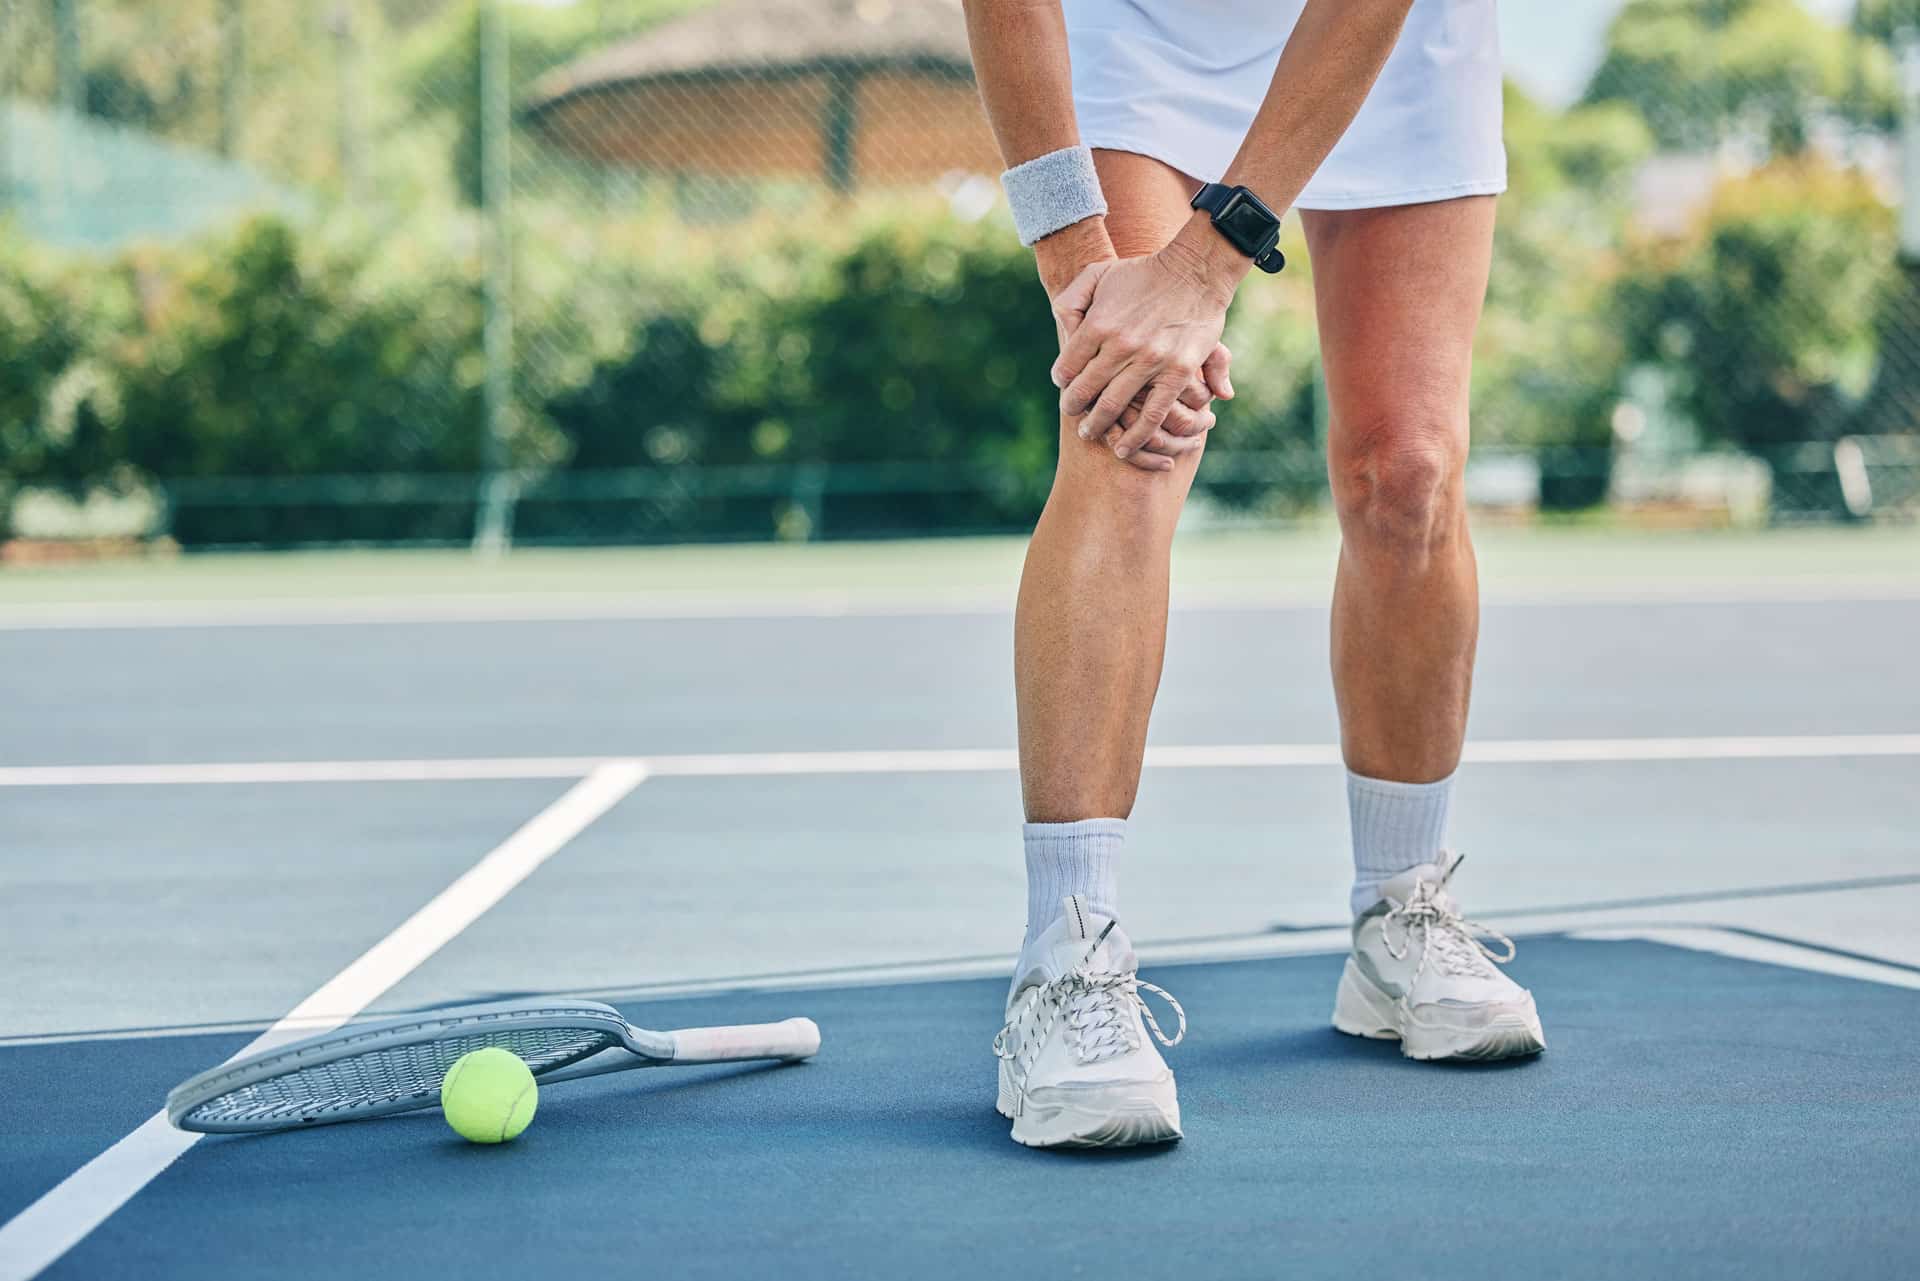 Top 7 activities with the highest risk of meniscus tear